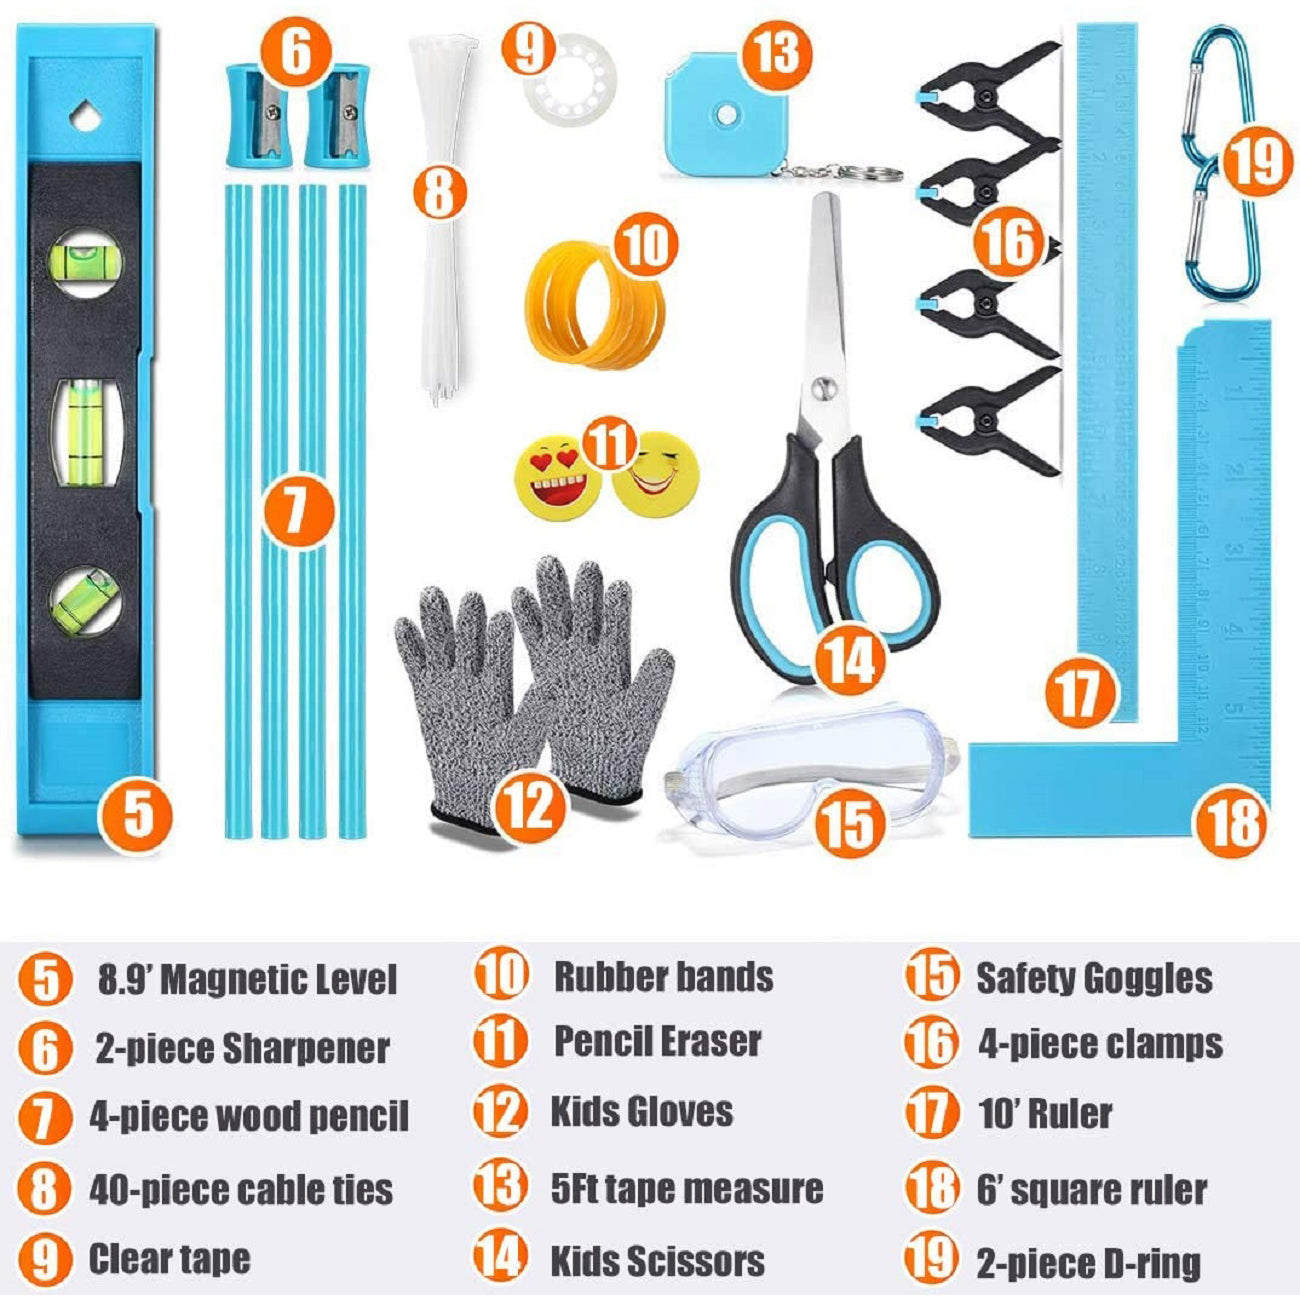 REXBETI 18pcs Blue Young Builders Tool Set with Real Hand Tools, Reinforced Kids Tool Belt, Waist 20-32, Kids Learning Tool Kit for Home DIY and.